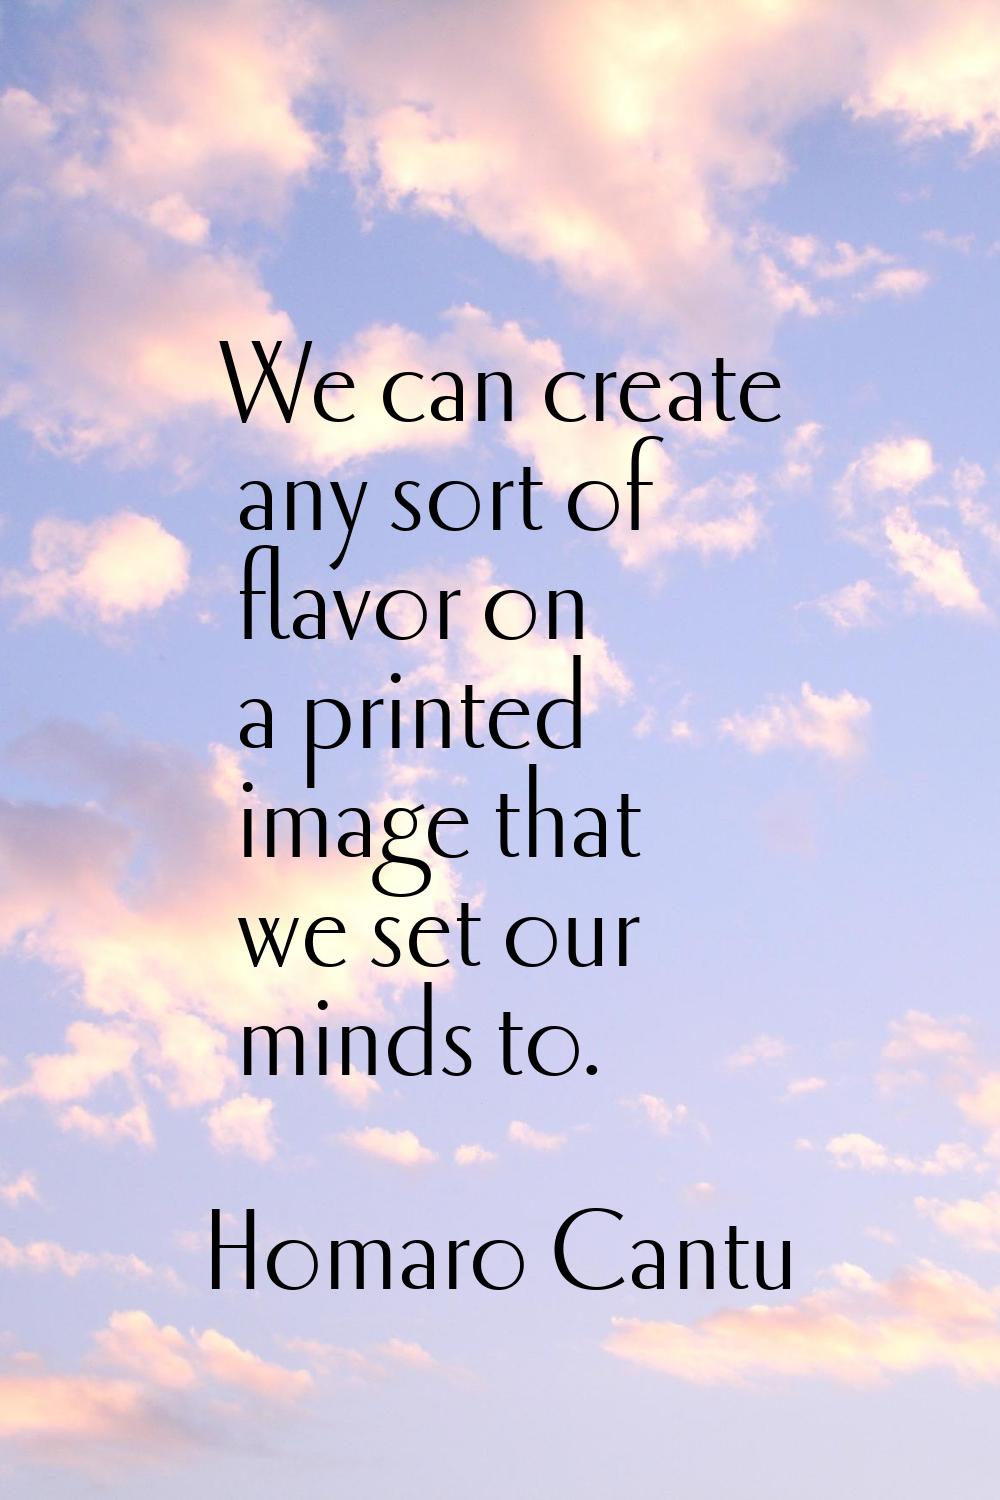 We can create any sort of flavor on a printed image that we set our minds to.